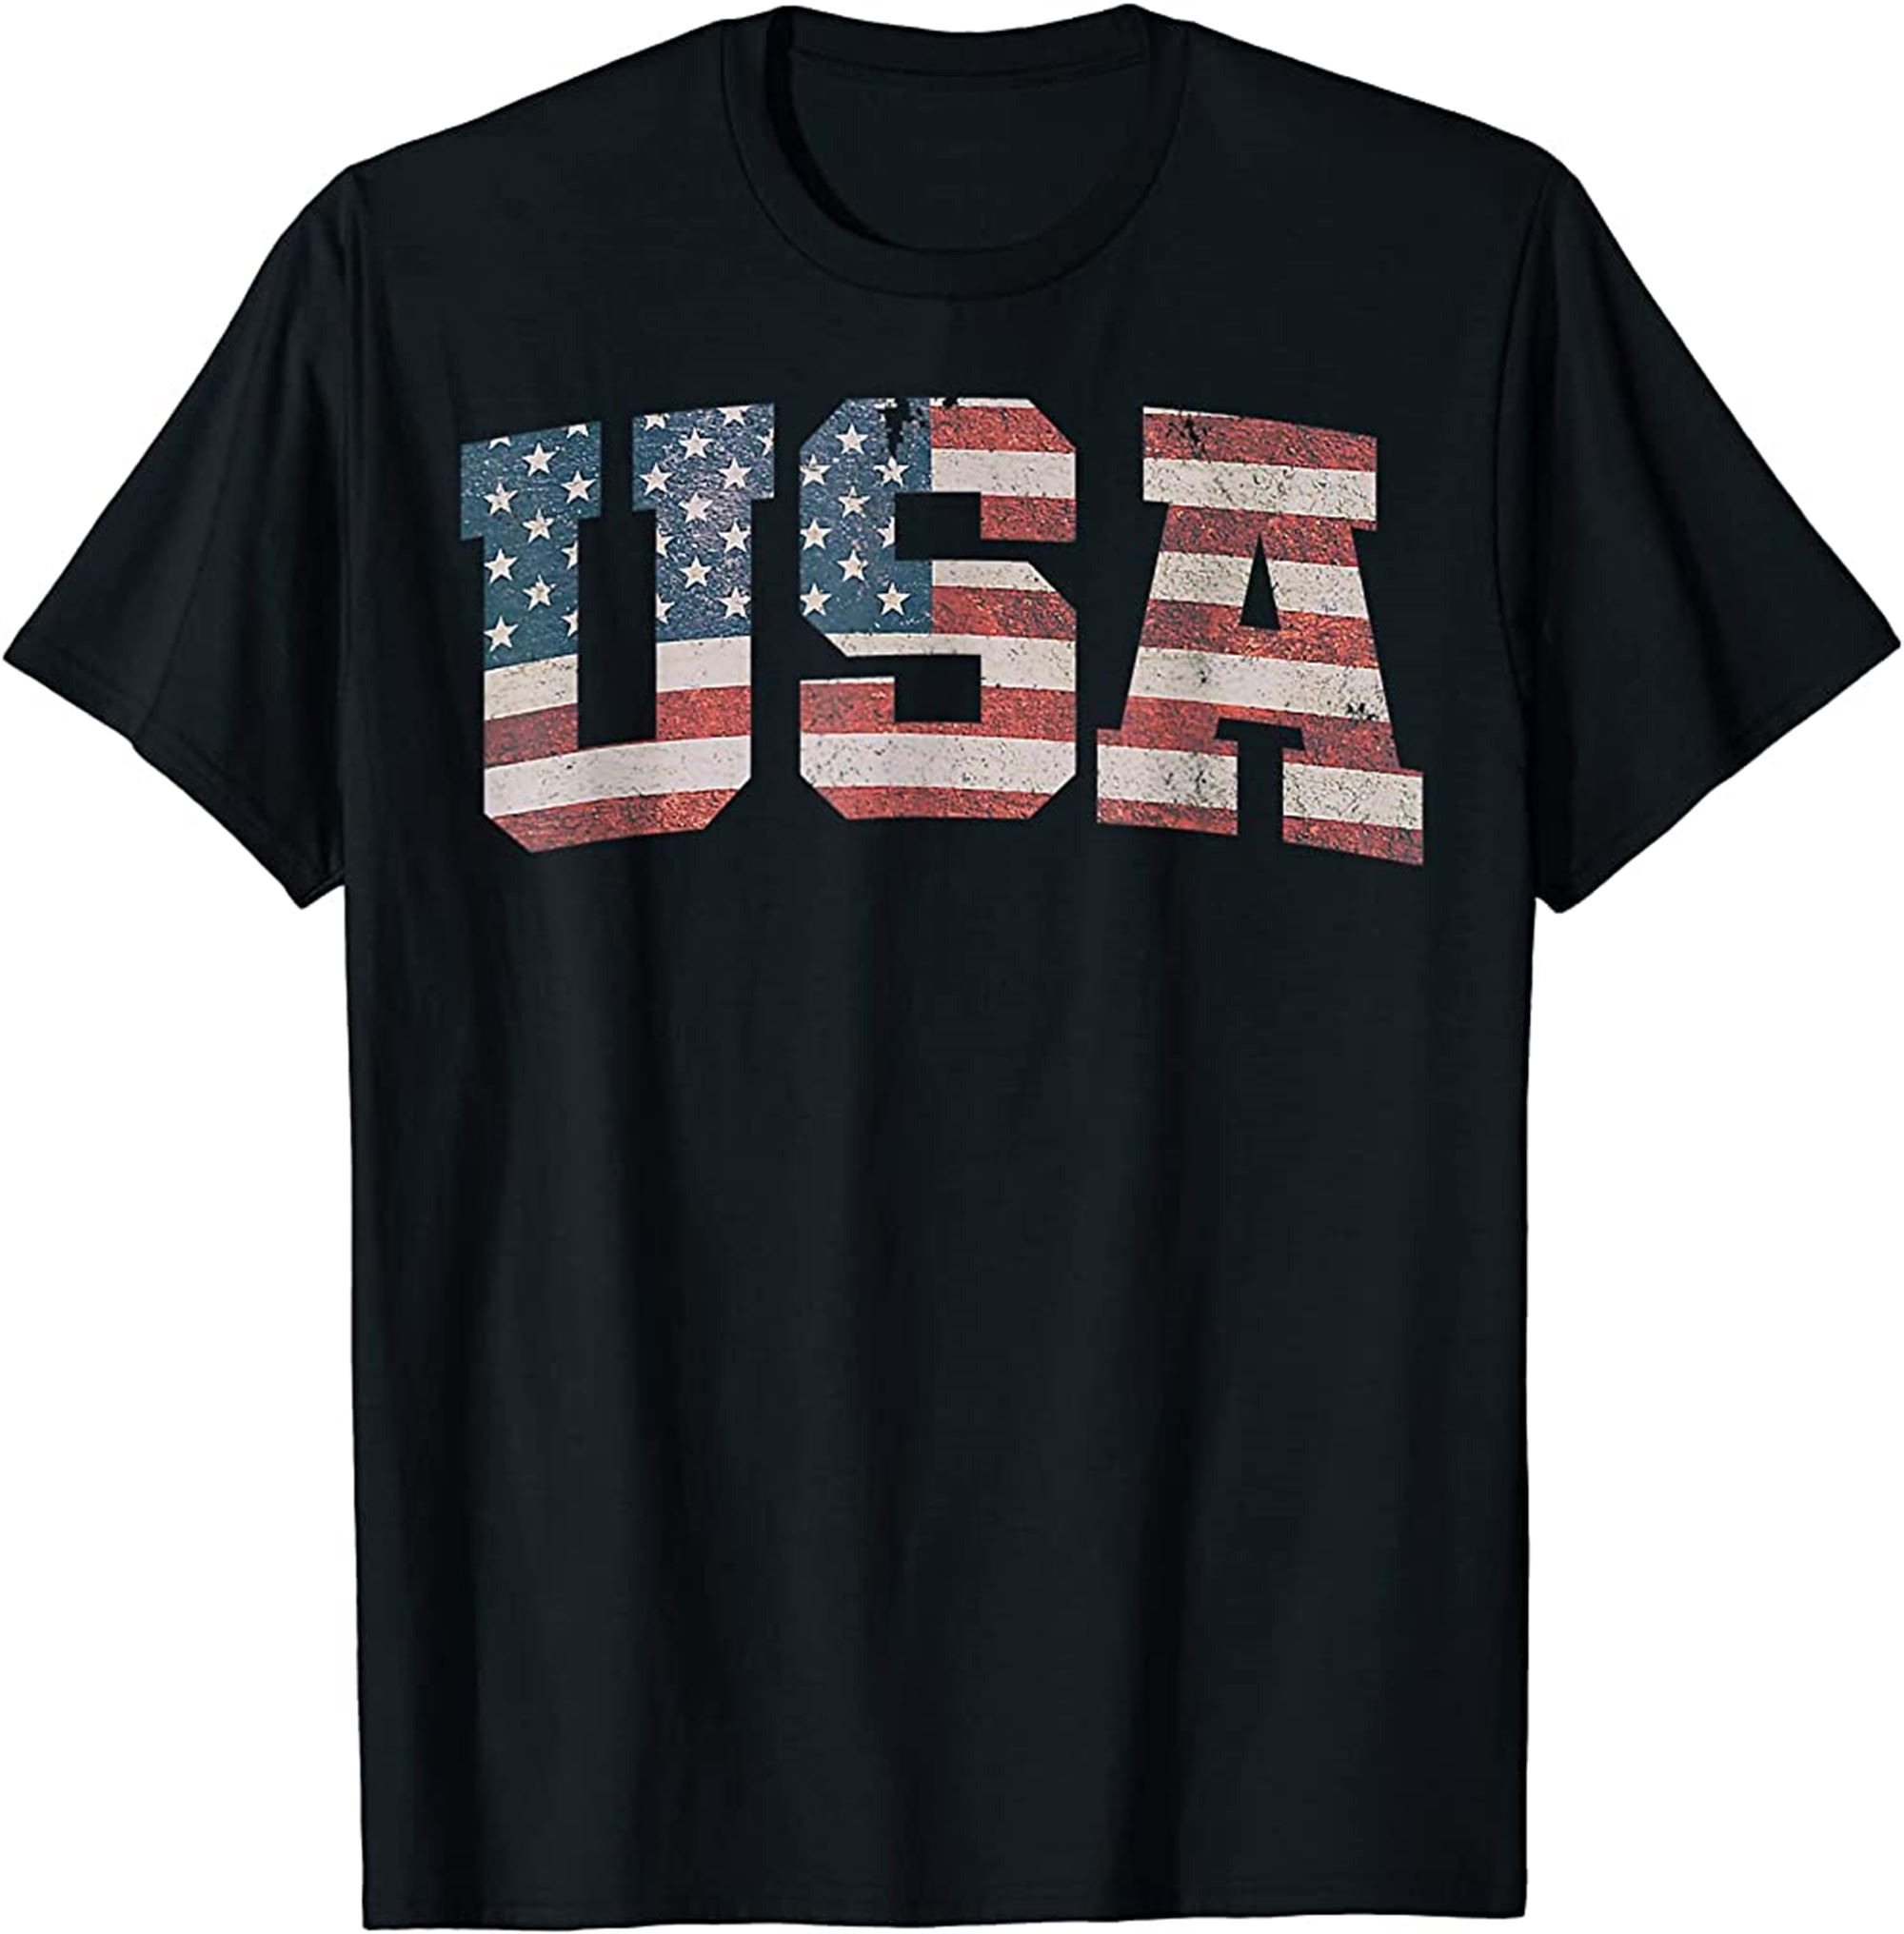 Usa Us Flag Tee Patriodic 4th Of July America T-shirt Full Size Up To 5xl